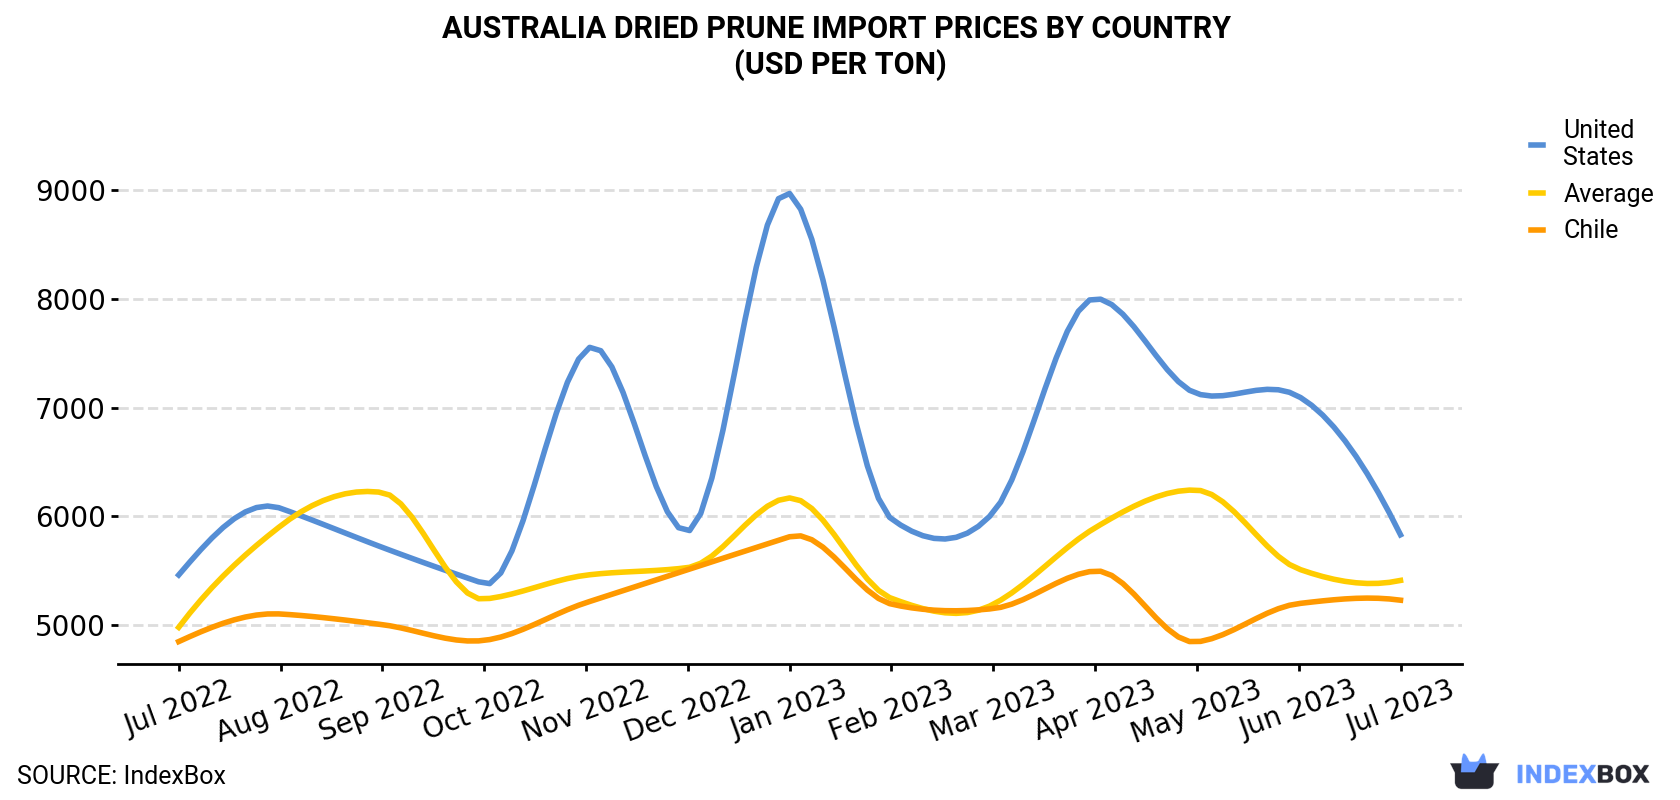 Australia Dried Prune Import Prices By Country (USD Per Ton)